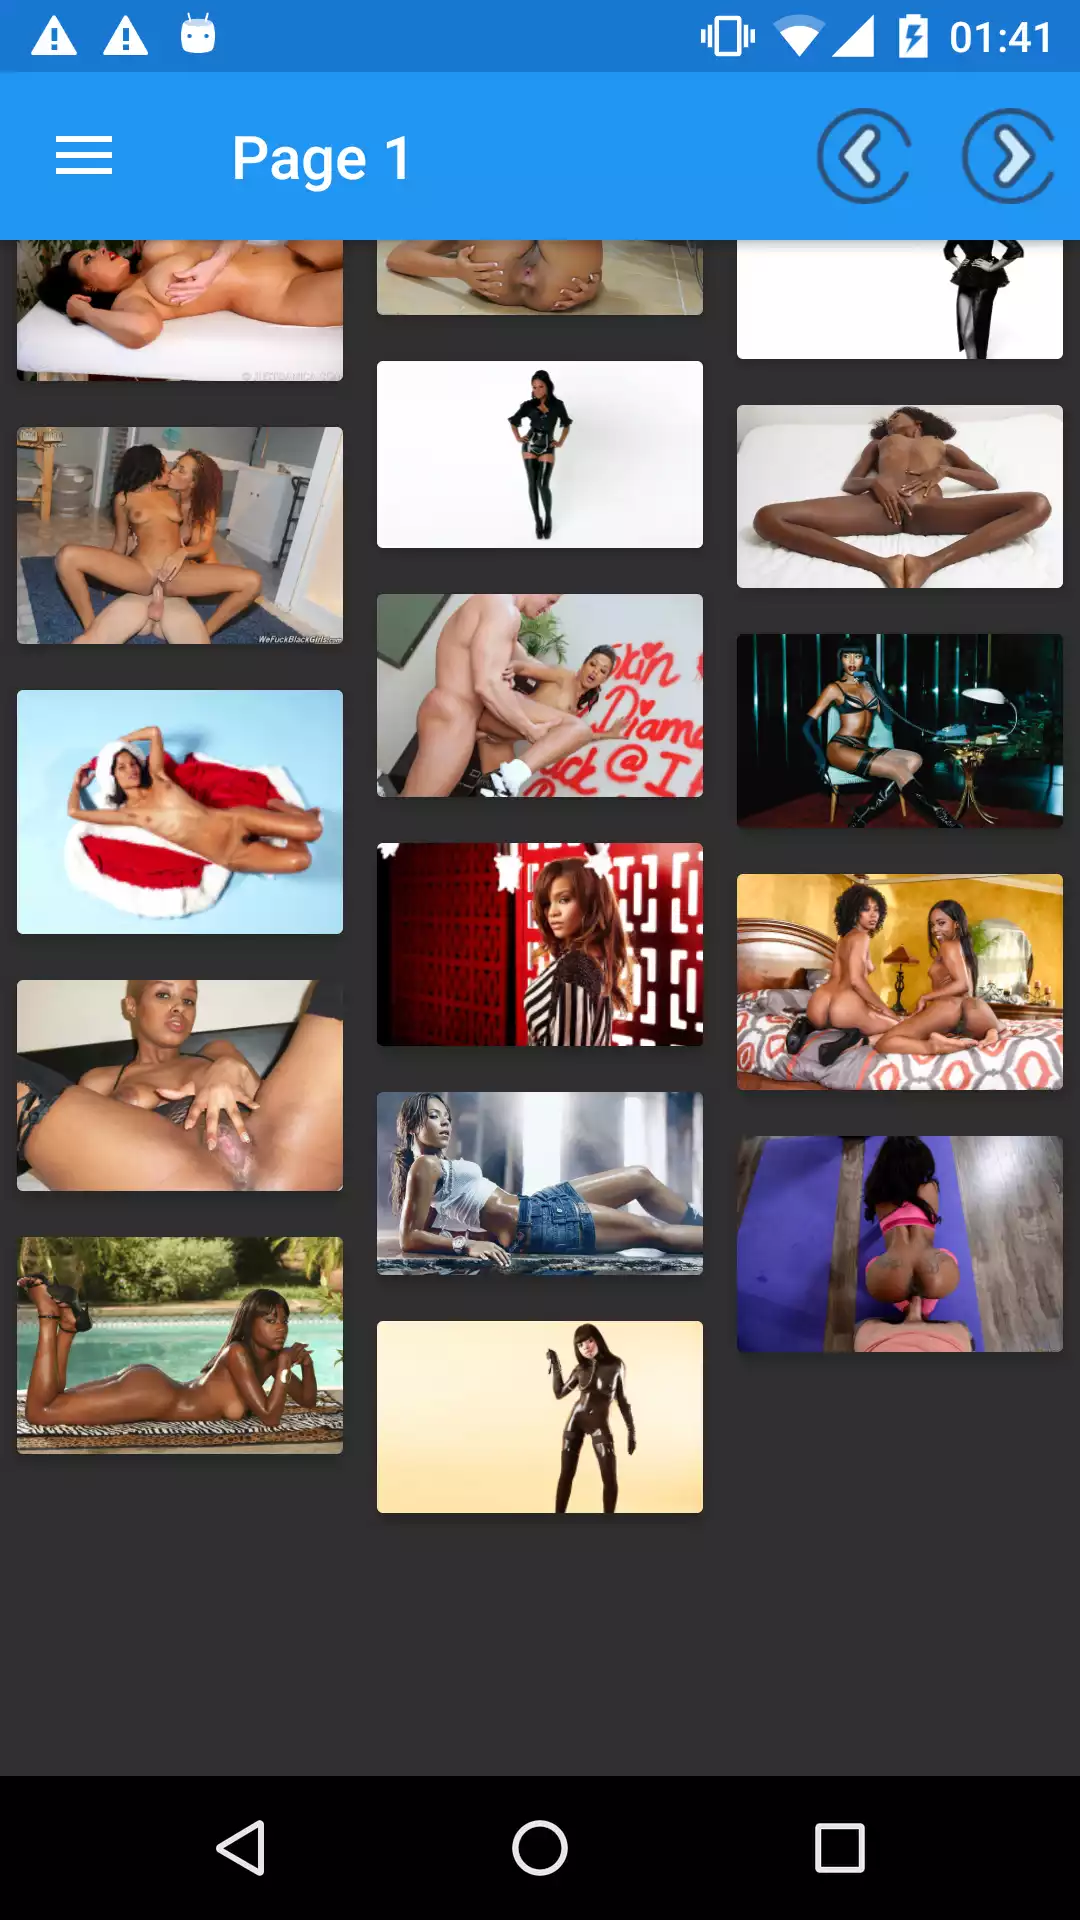 Ebony walls wallpaper,edit,best,wallpapers,girl,porn,app,apps,photo,apk,gallery,downloader,pictures,for,hentai,android,sexy,comixharem,backgrounds,mobile,download